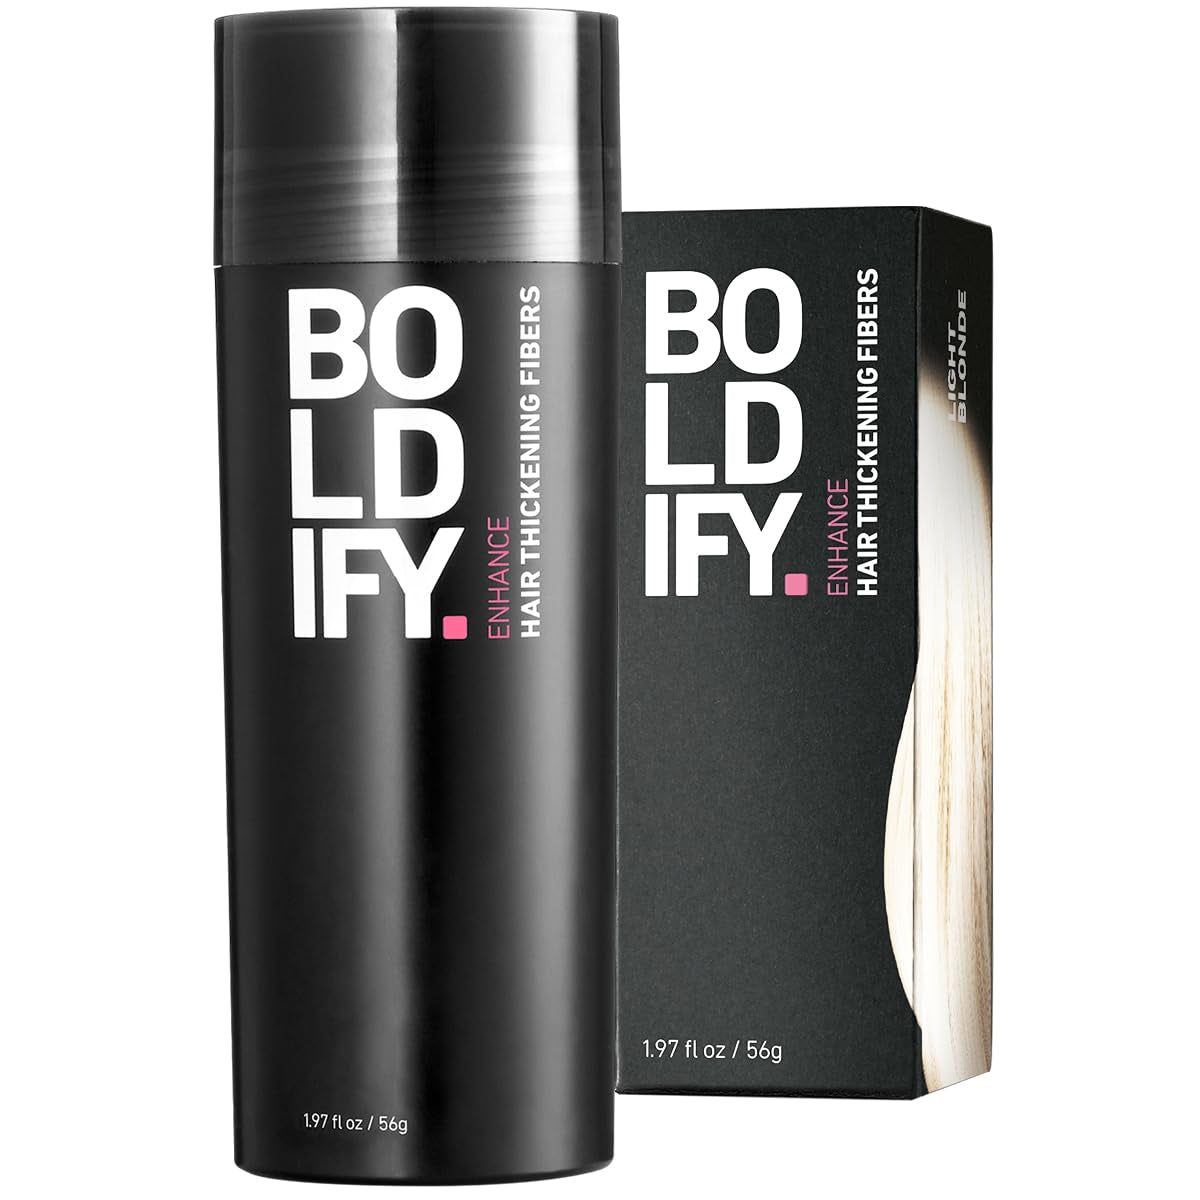 BOLDIFY Hair Fibers (56G) Fill in Fine and Thinning Hair for an Instantly Thicker & Fuller Look - Best Value & Superior Formula -14 Shades for Women & Men - DARK BROWN